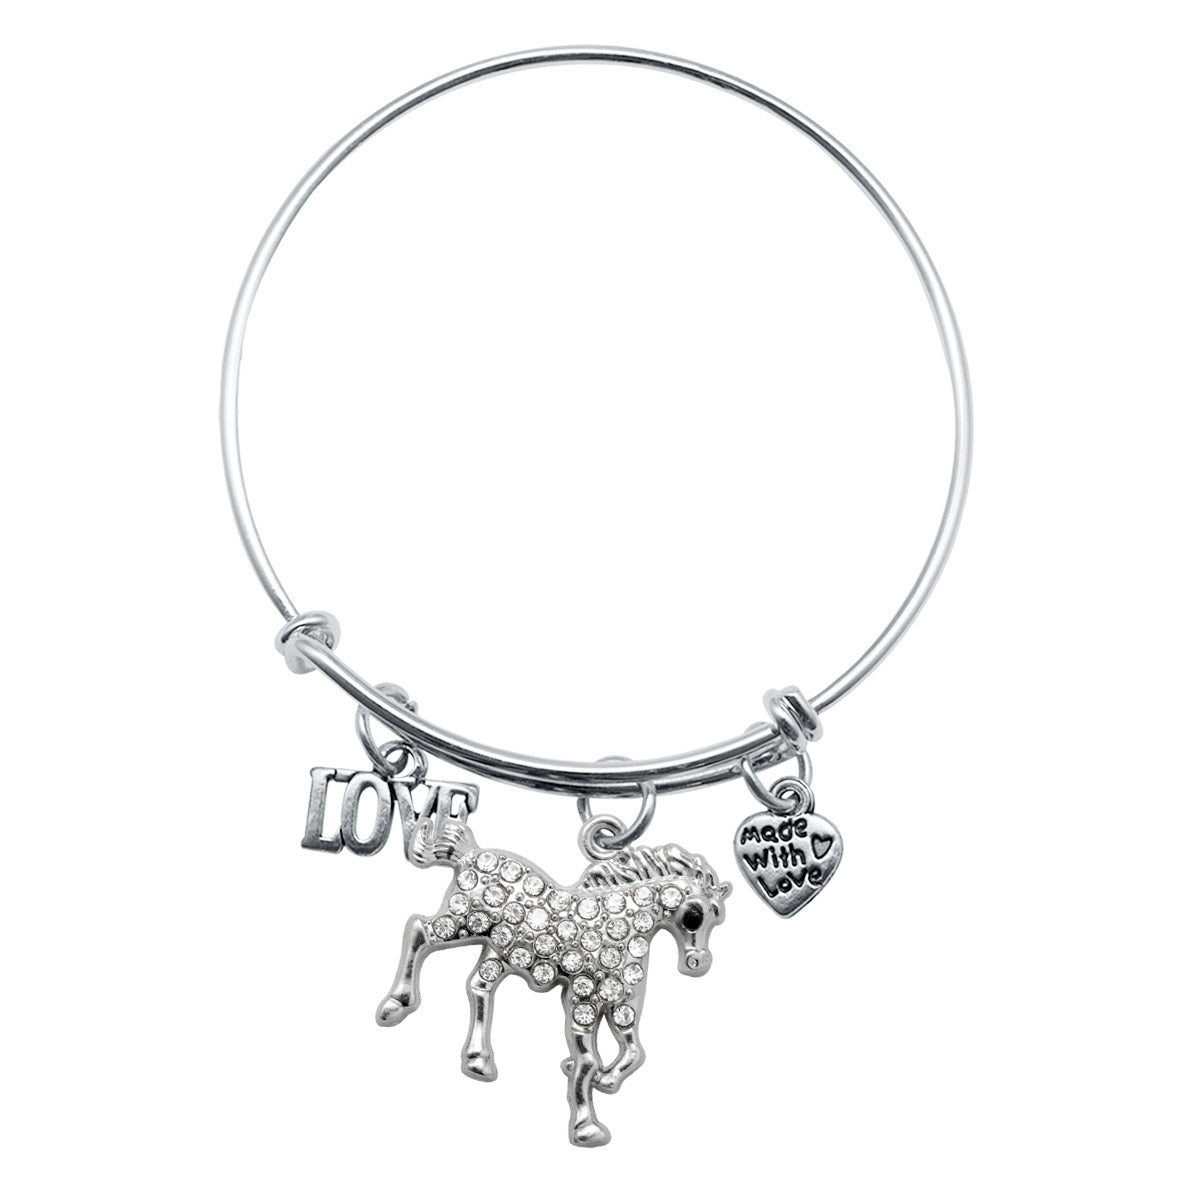 Silver Love Galloping Horse Charm Wire Bangle Bracelet